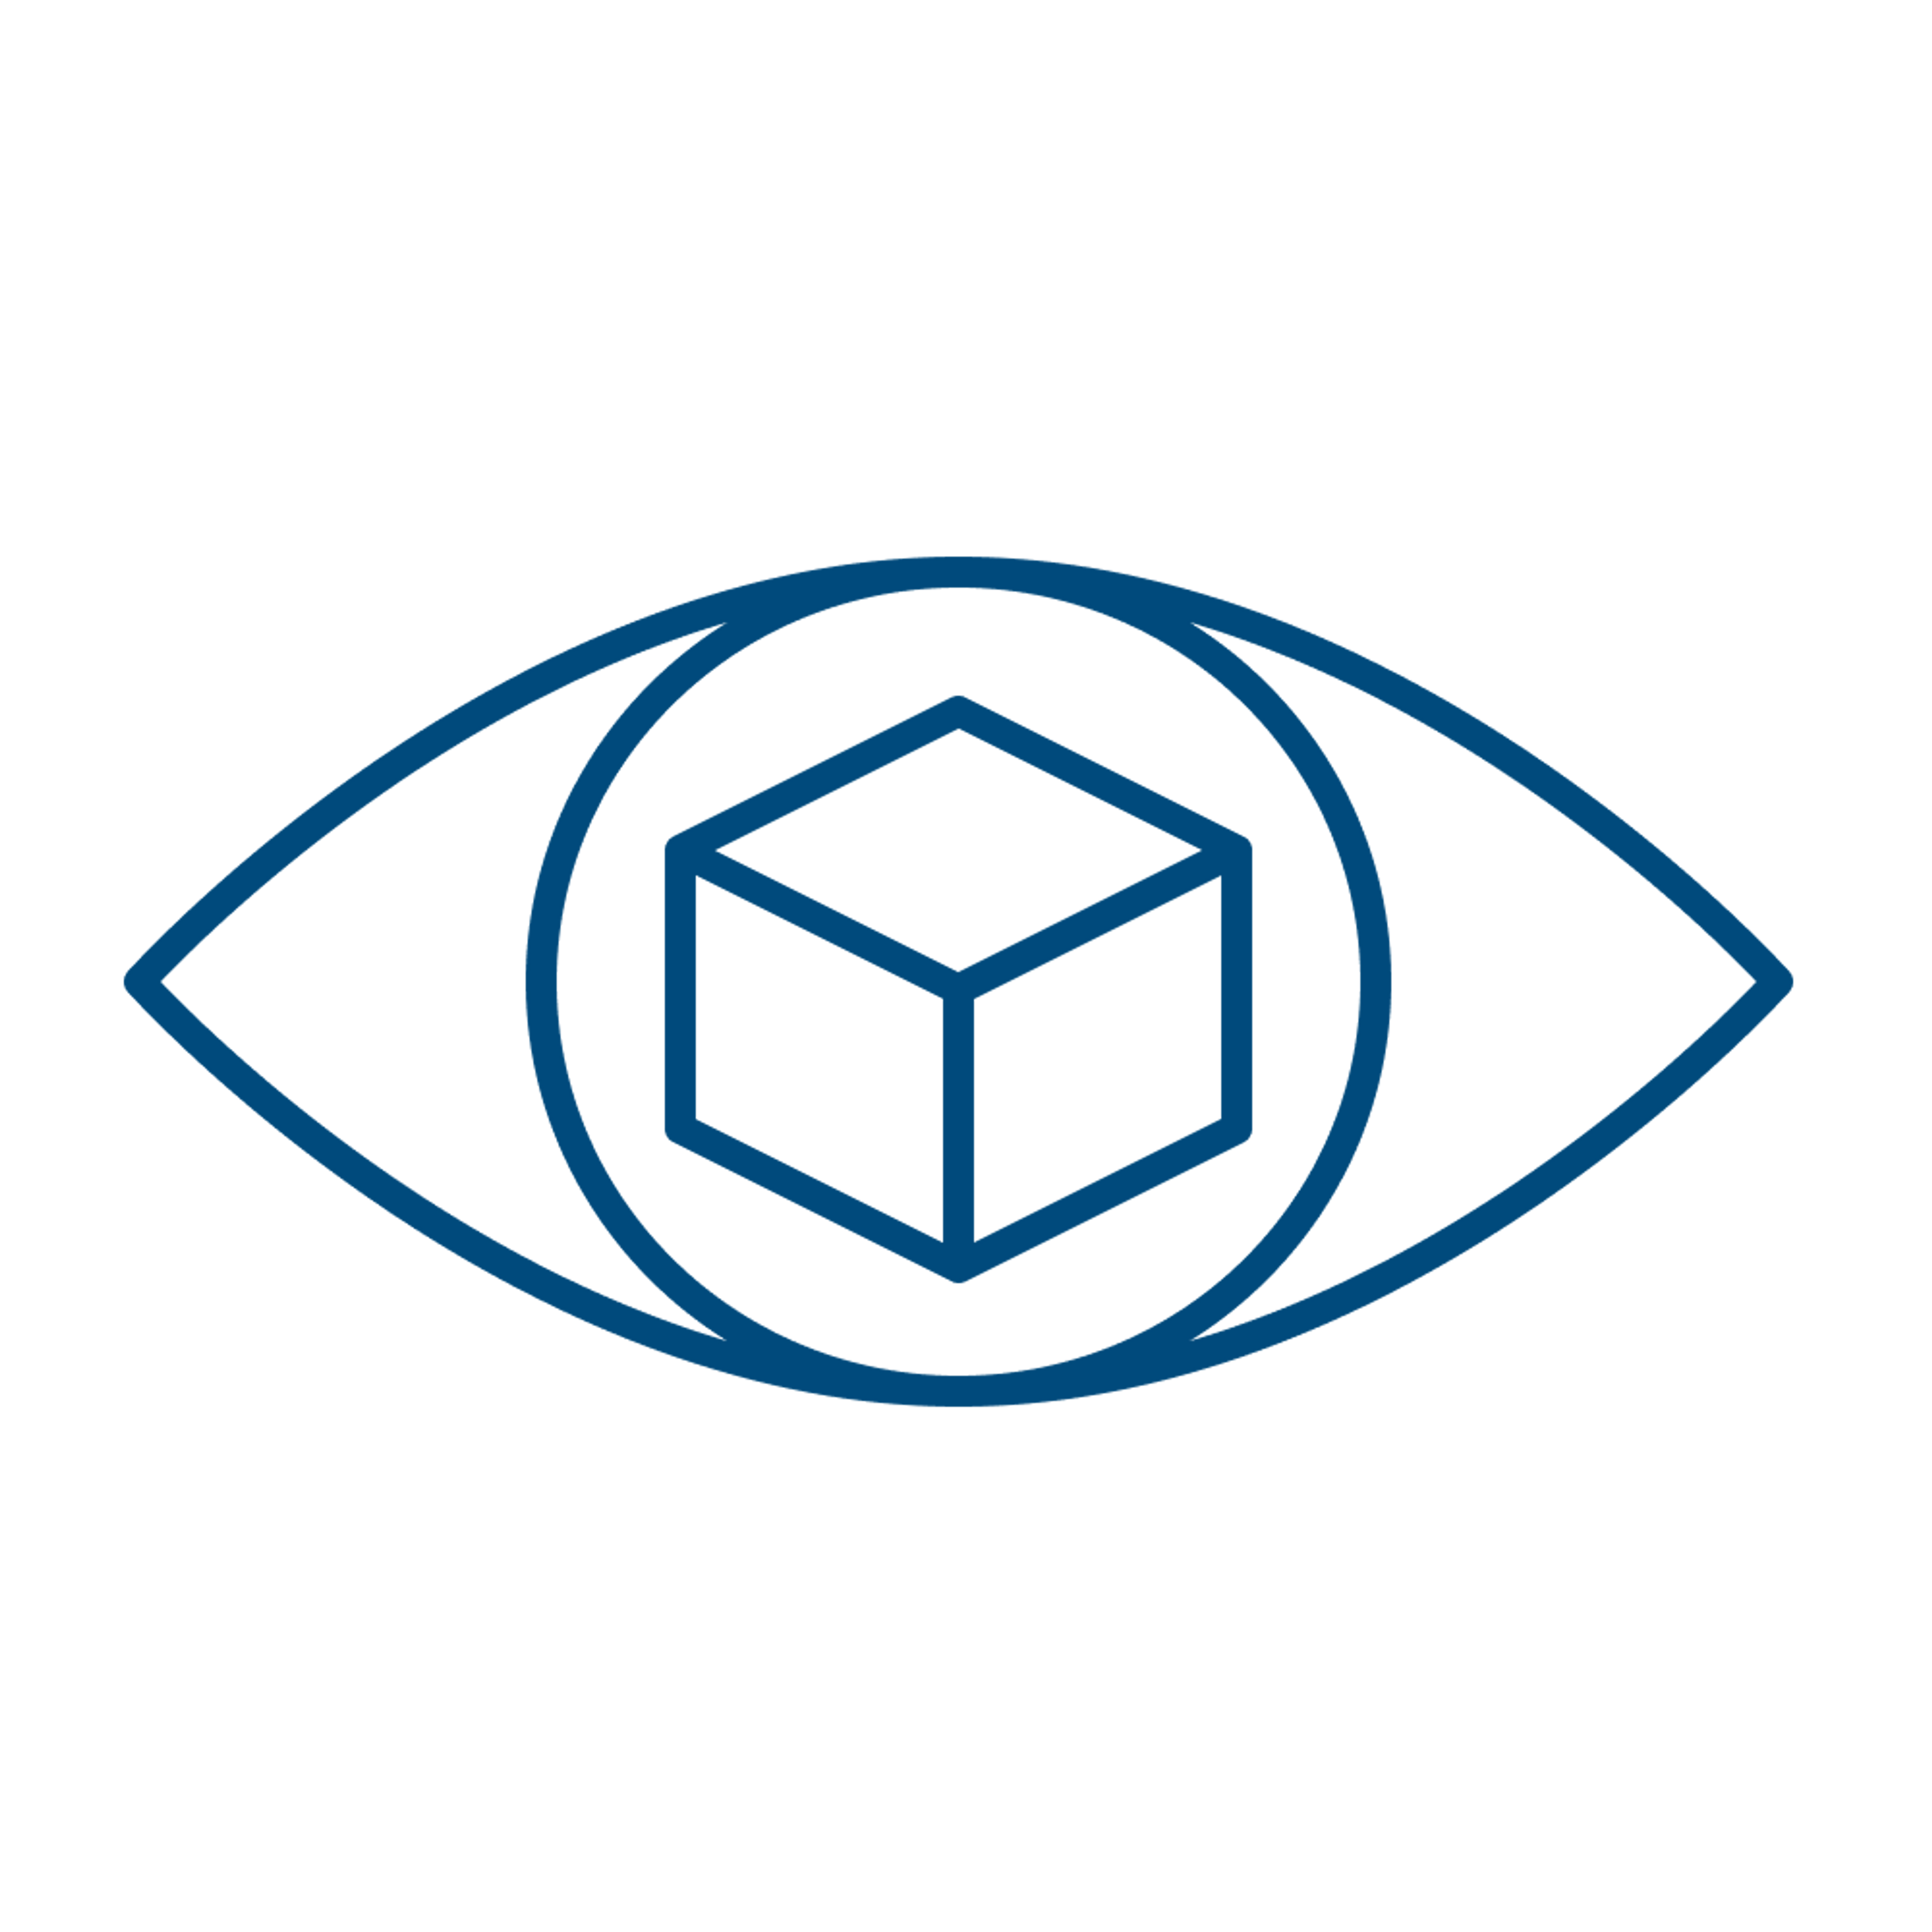 An icon depicting an eye with a 3D box instead of a pupil